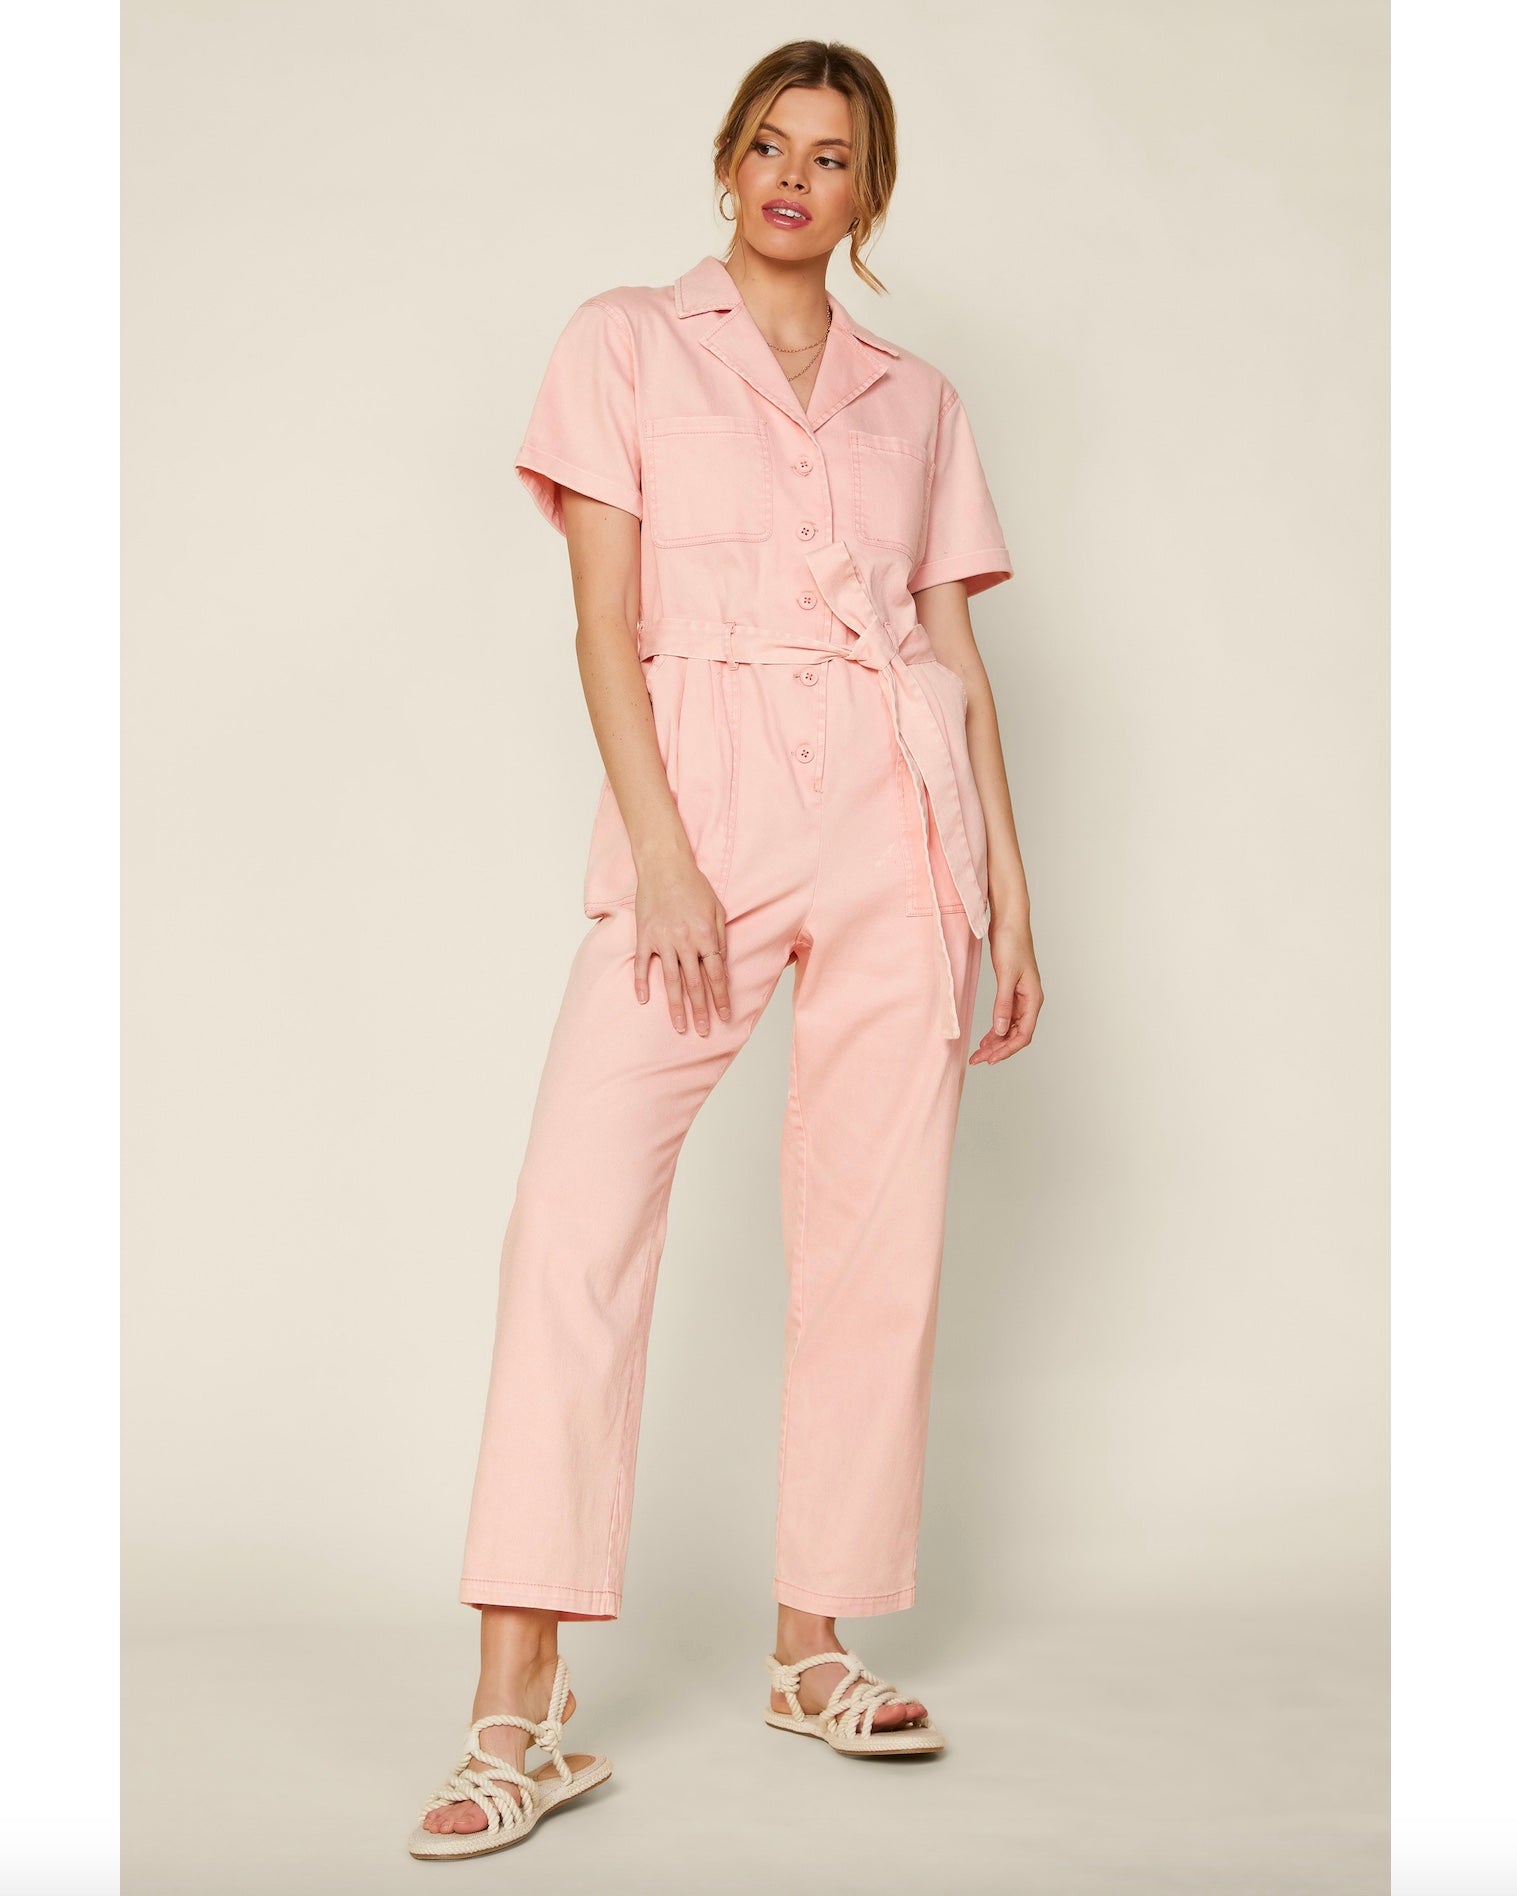 Model wearing skies are blue utility jumpsuit in peach wearing white shoes on a beige background